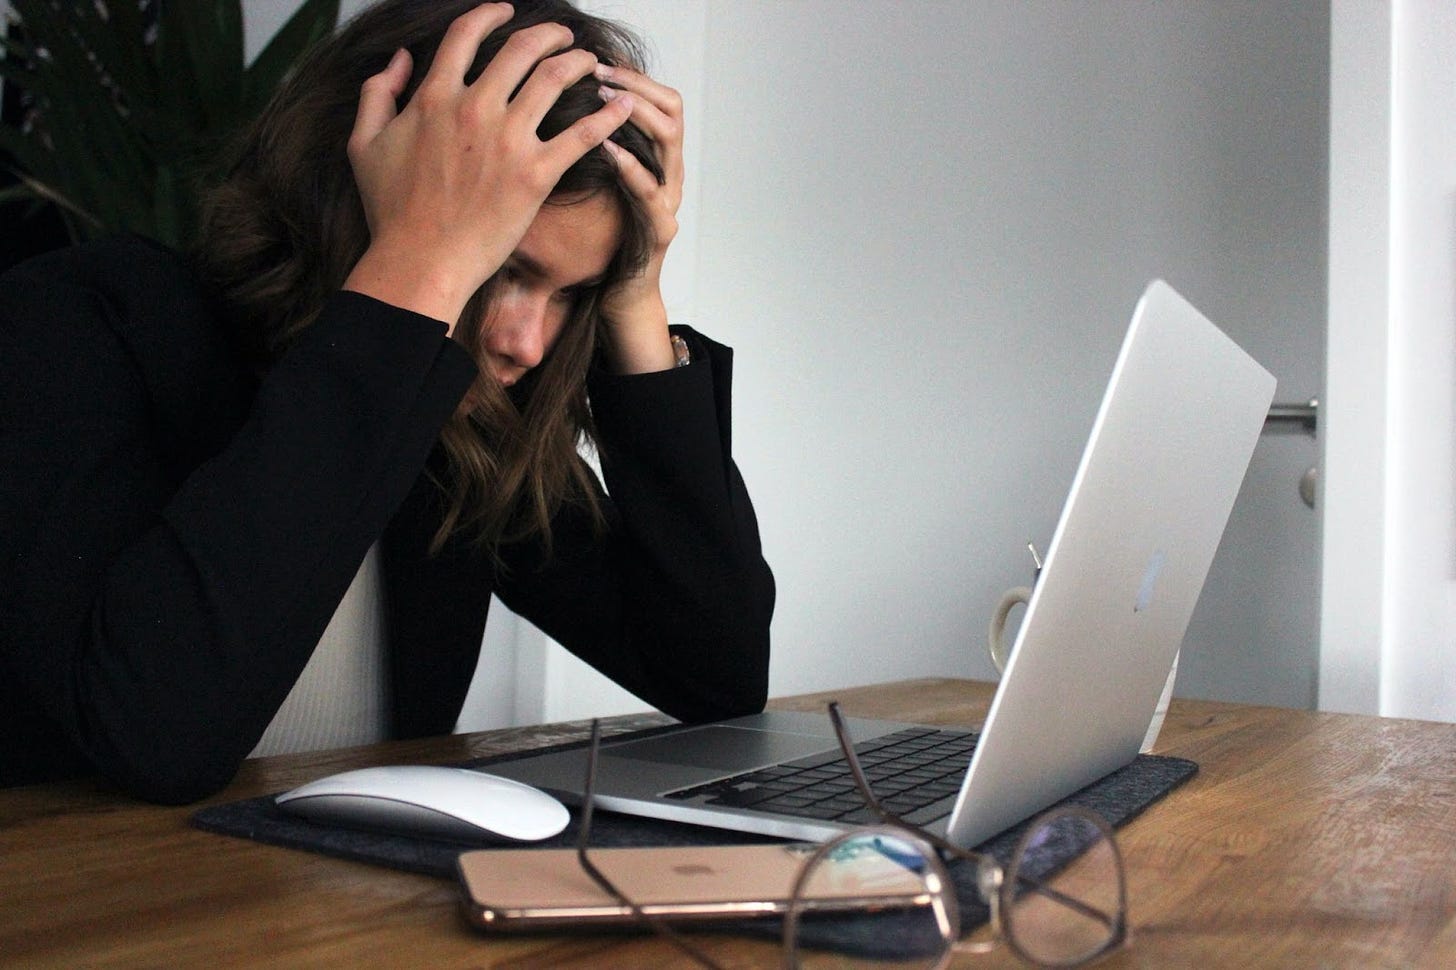 A frustrated person in front of computer